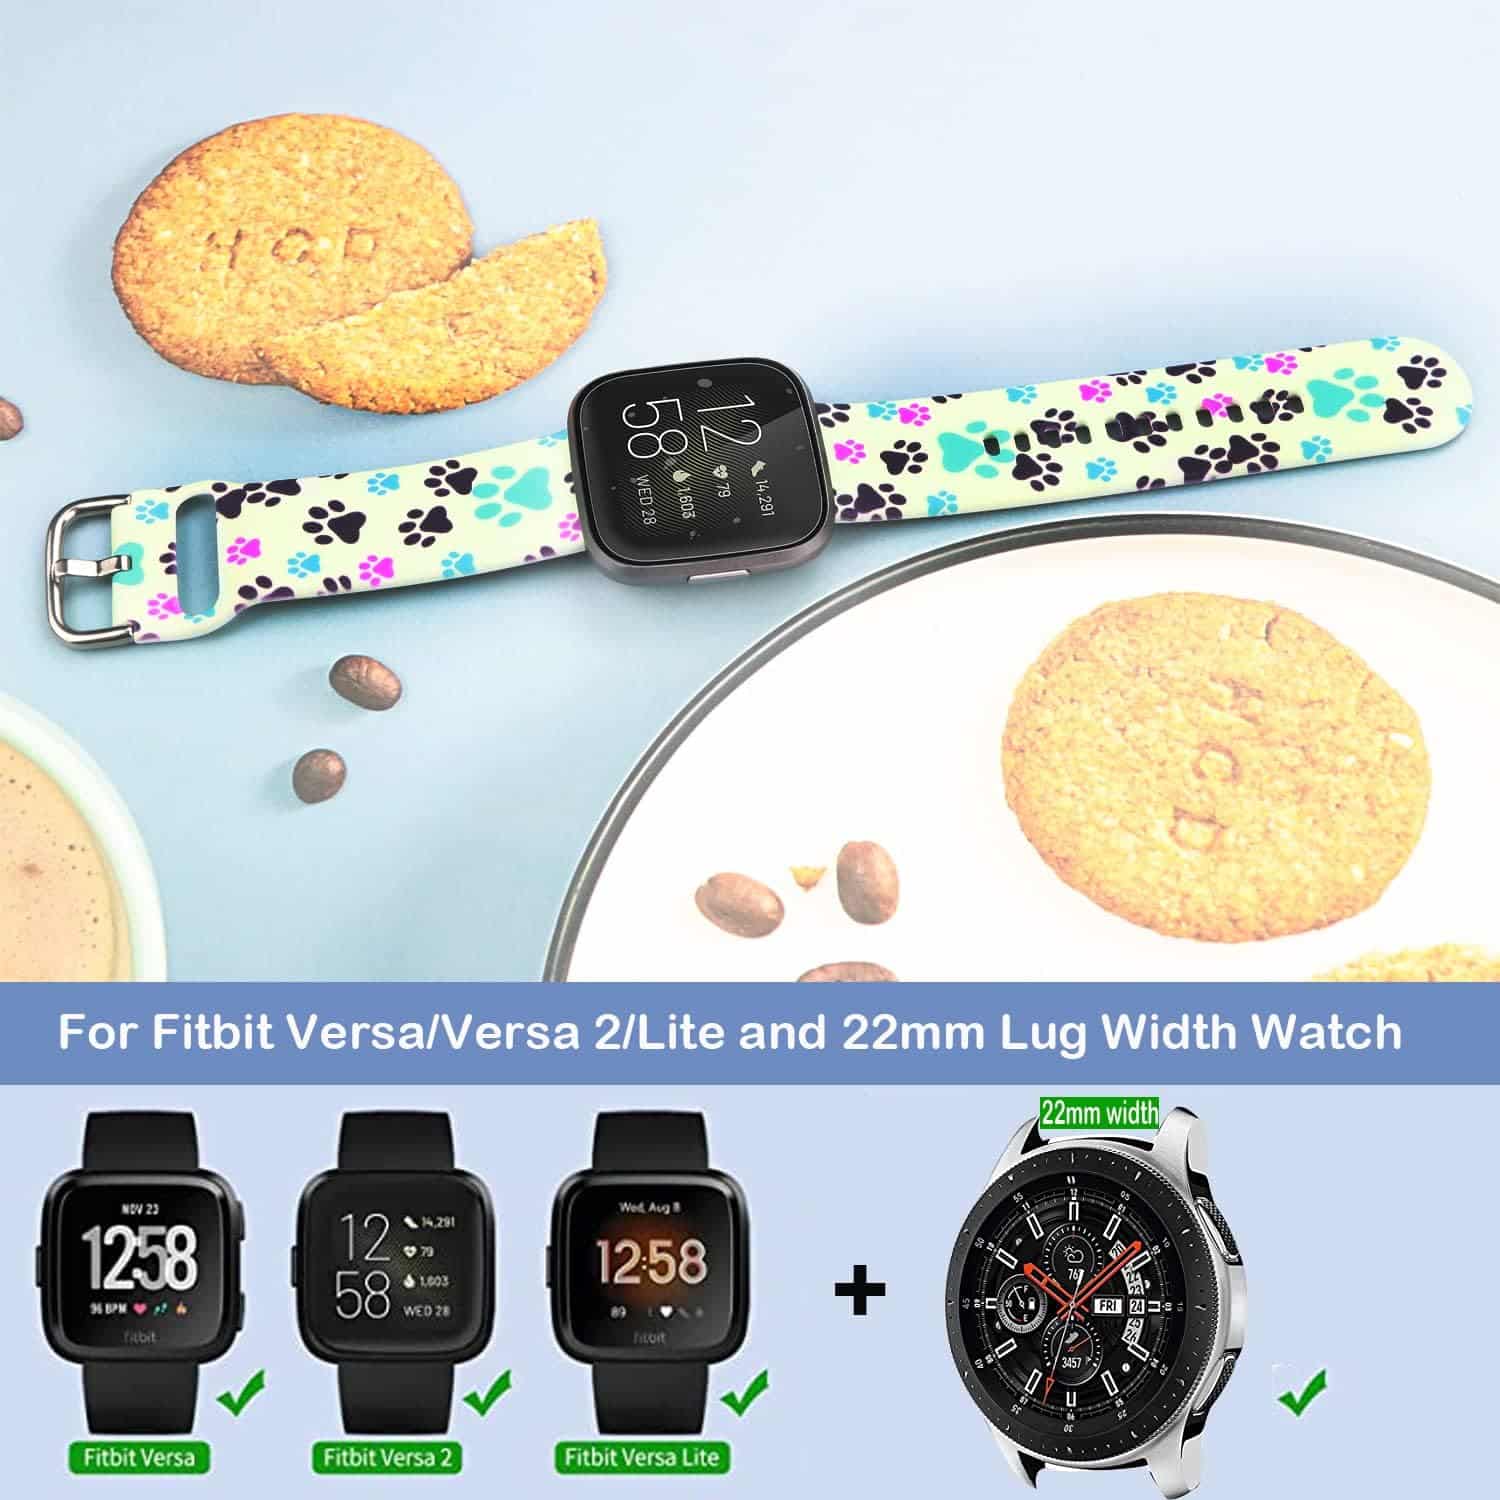 Enhance Your Fitbit Versa Experience with Ecute Bands – A Review